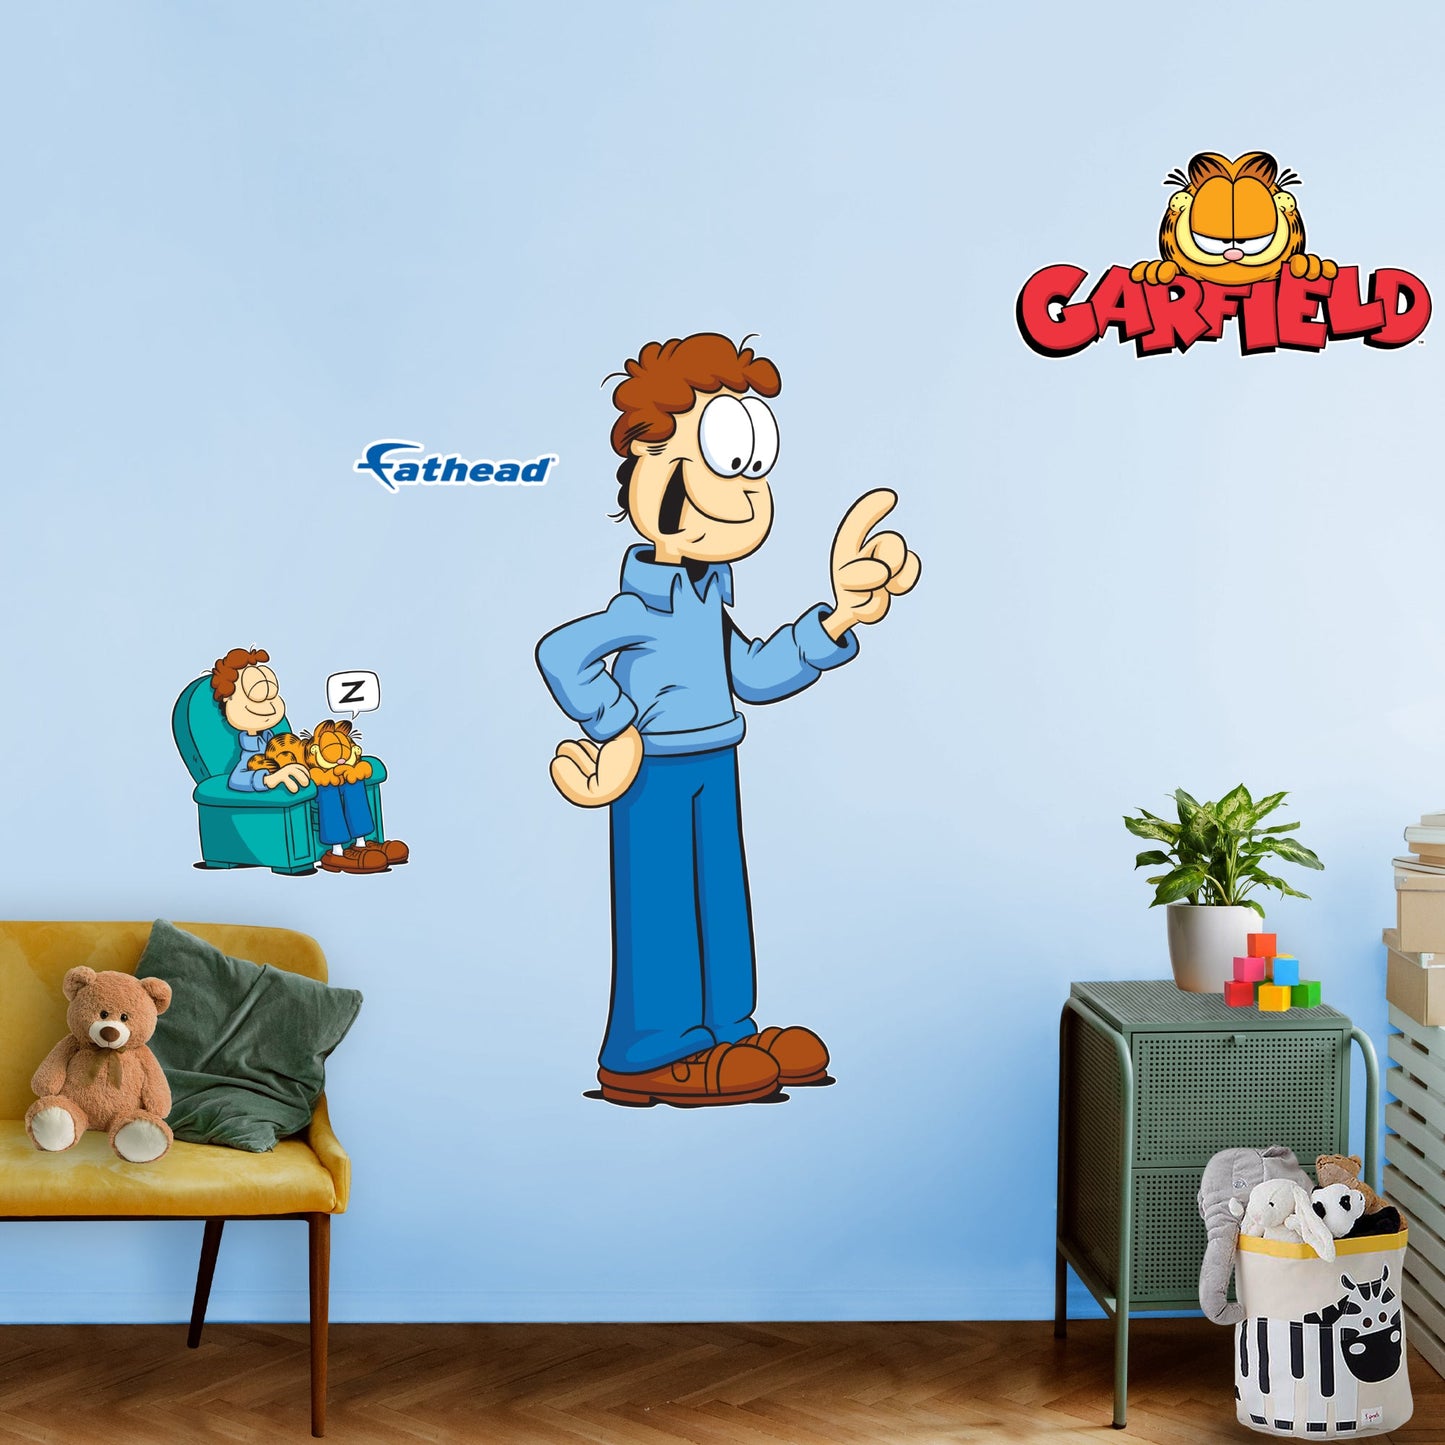 Garfield: Jon RealBig - Officially Licensed Nickelodeon Removable Adhesive Decal